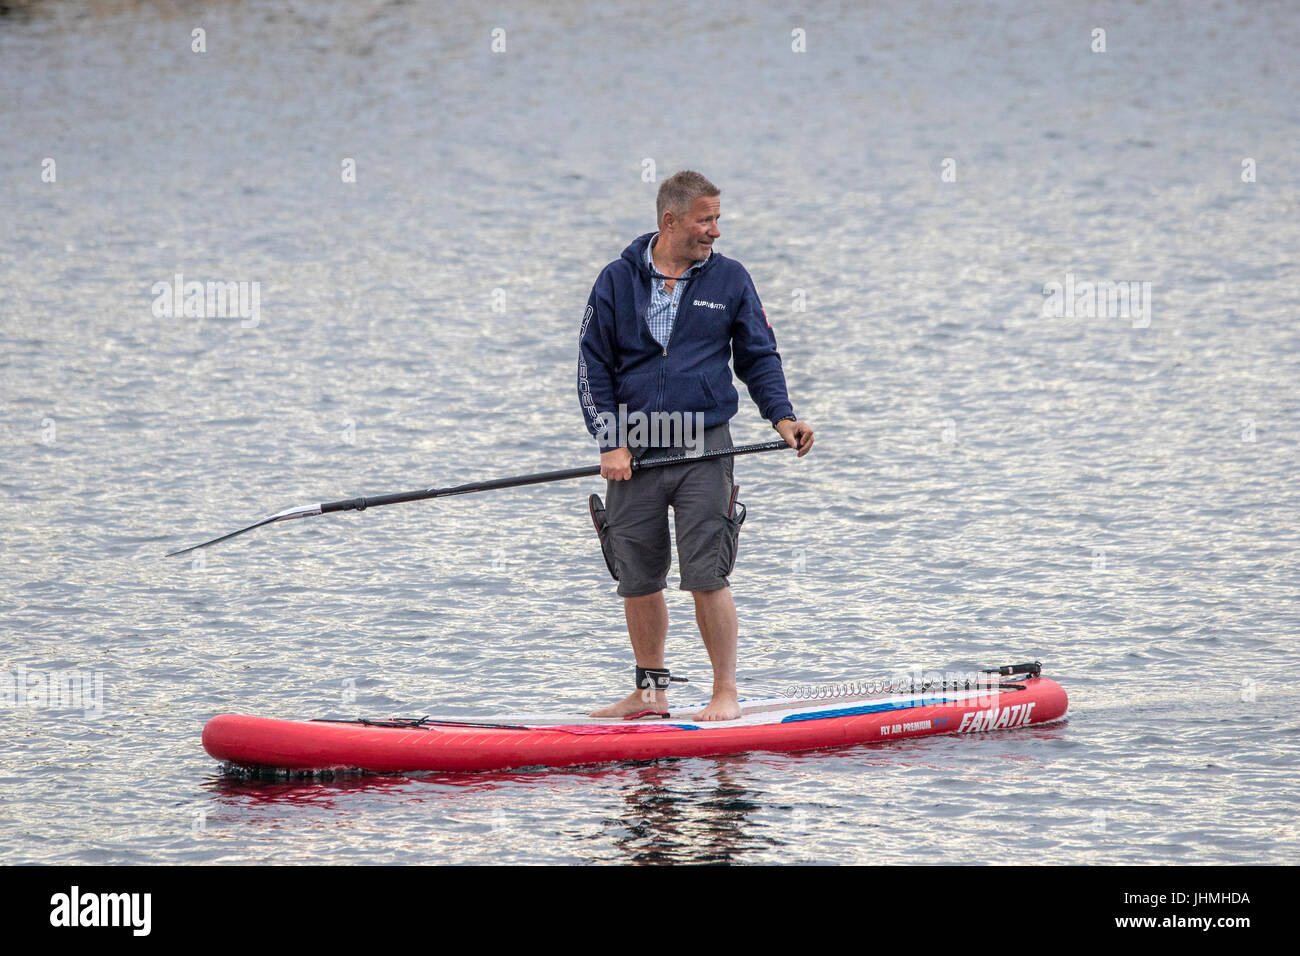 Southport, Merseyside, 14th July 2017. UK Weather.   A much cooler grey evening doesn't stop tourists heading to the pier and seafront,  Stand Up Paddle Boarding,  paddleboarding, paddle boarders surfing at Southport in Merseyside.  With heavy rain downpours expected people were eager to make the most of the dry weather before the rain arrives.   Credit: Cernan Elias/Alamy Live News Stock Photo